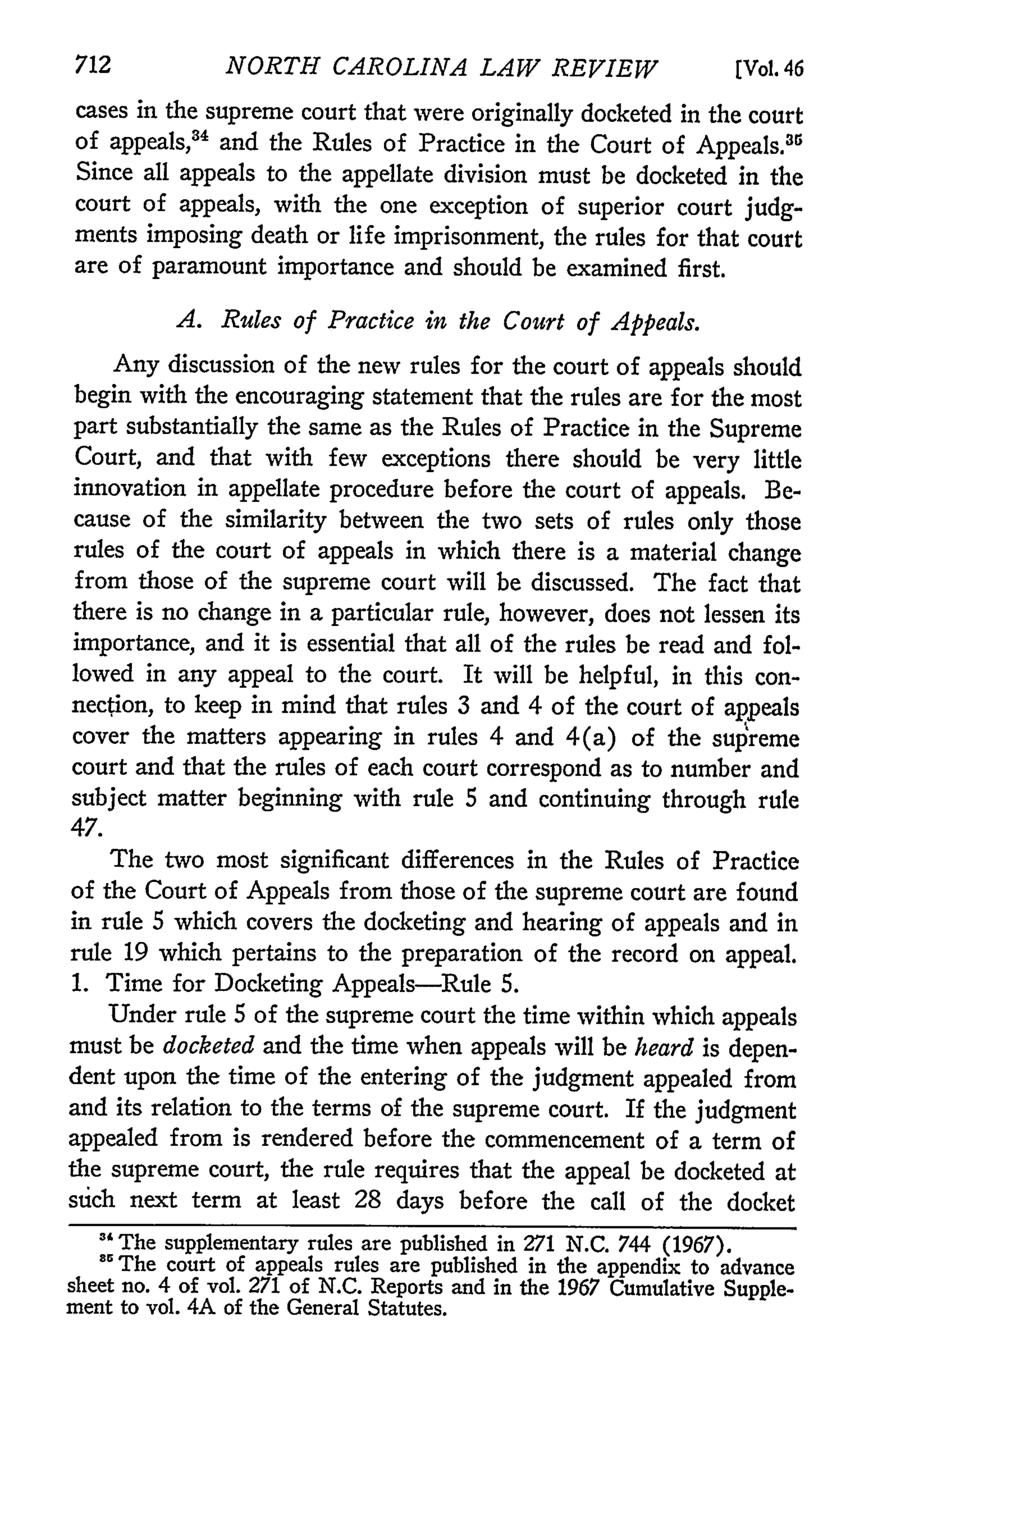 NORTH CAROLINA LAW REVIEW cases in the supreme court that were originally docketed in the court of appeals, 3 4 and the Rules of Practice in the Court of Appeals.